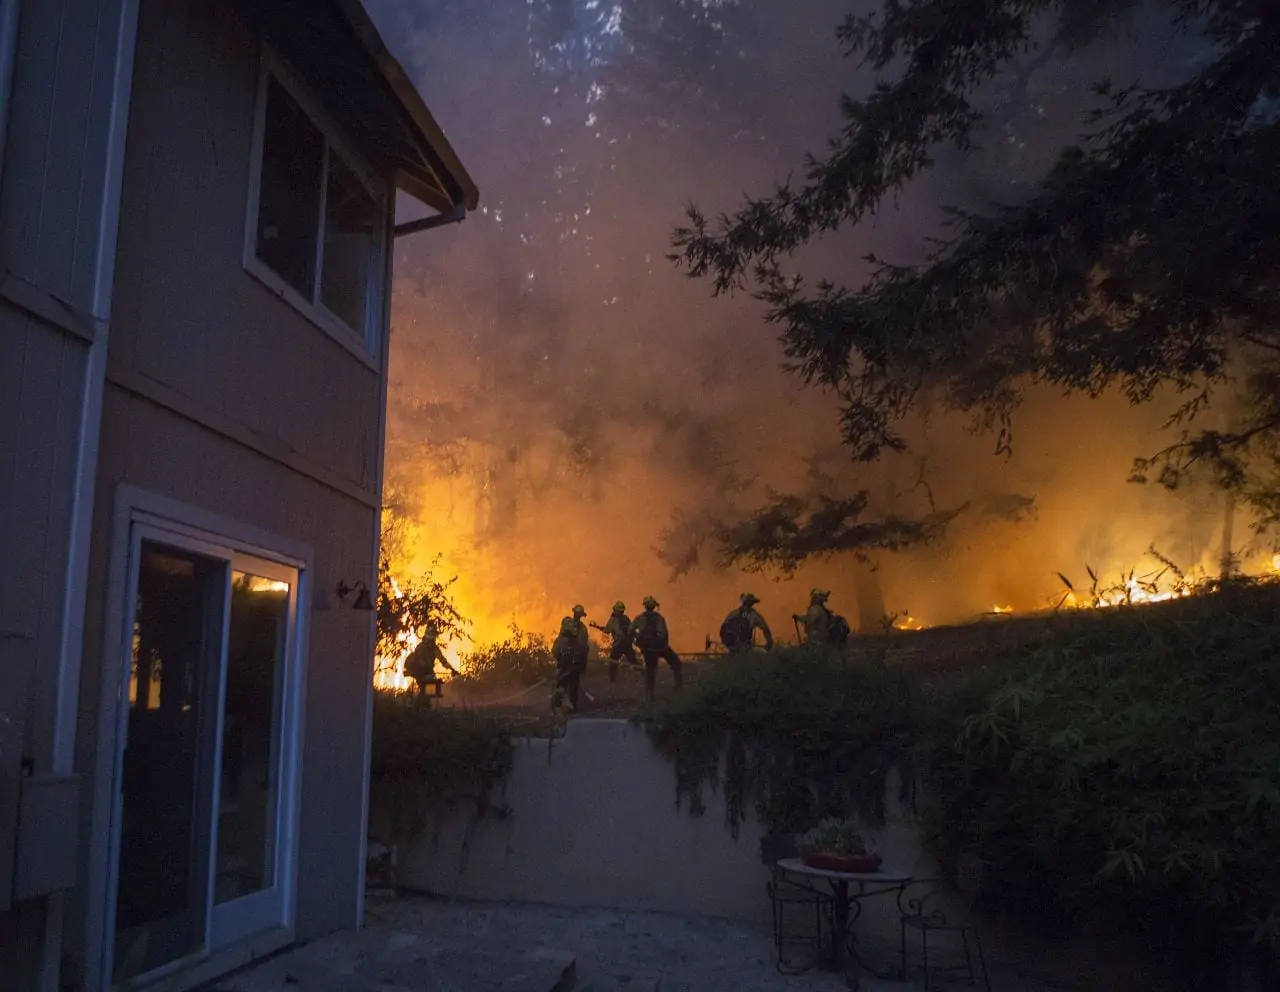 Fire outside of a home with firefighters combatting the blaze. Photo by David Royal